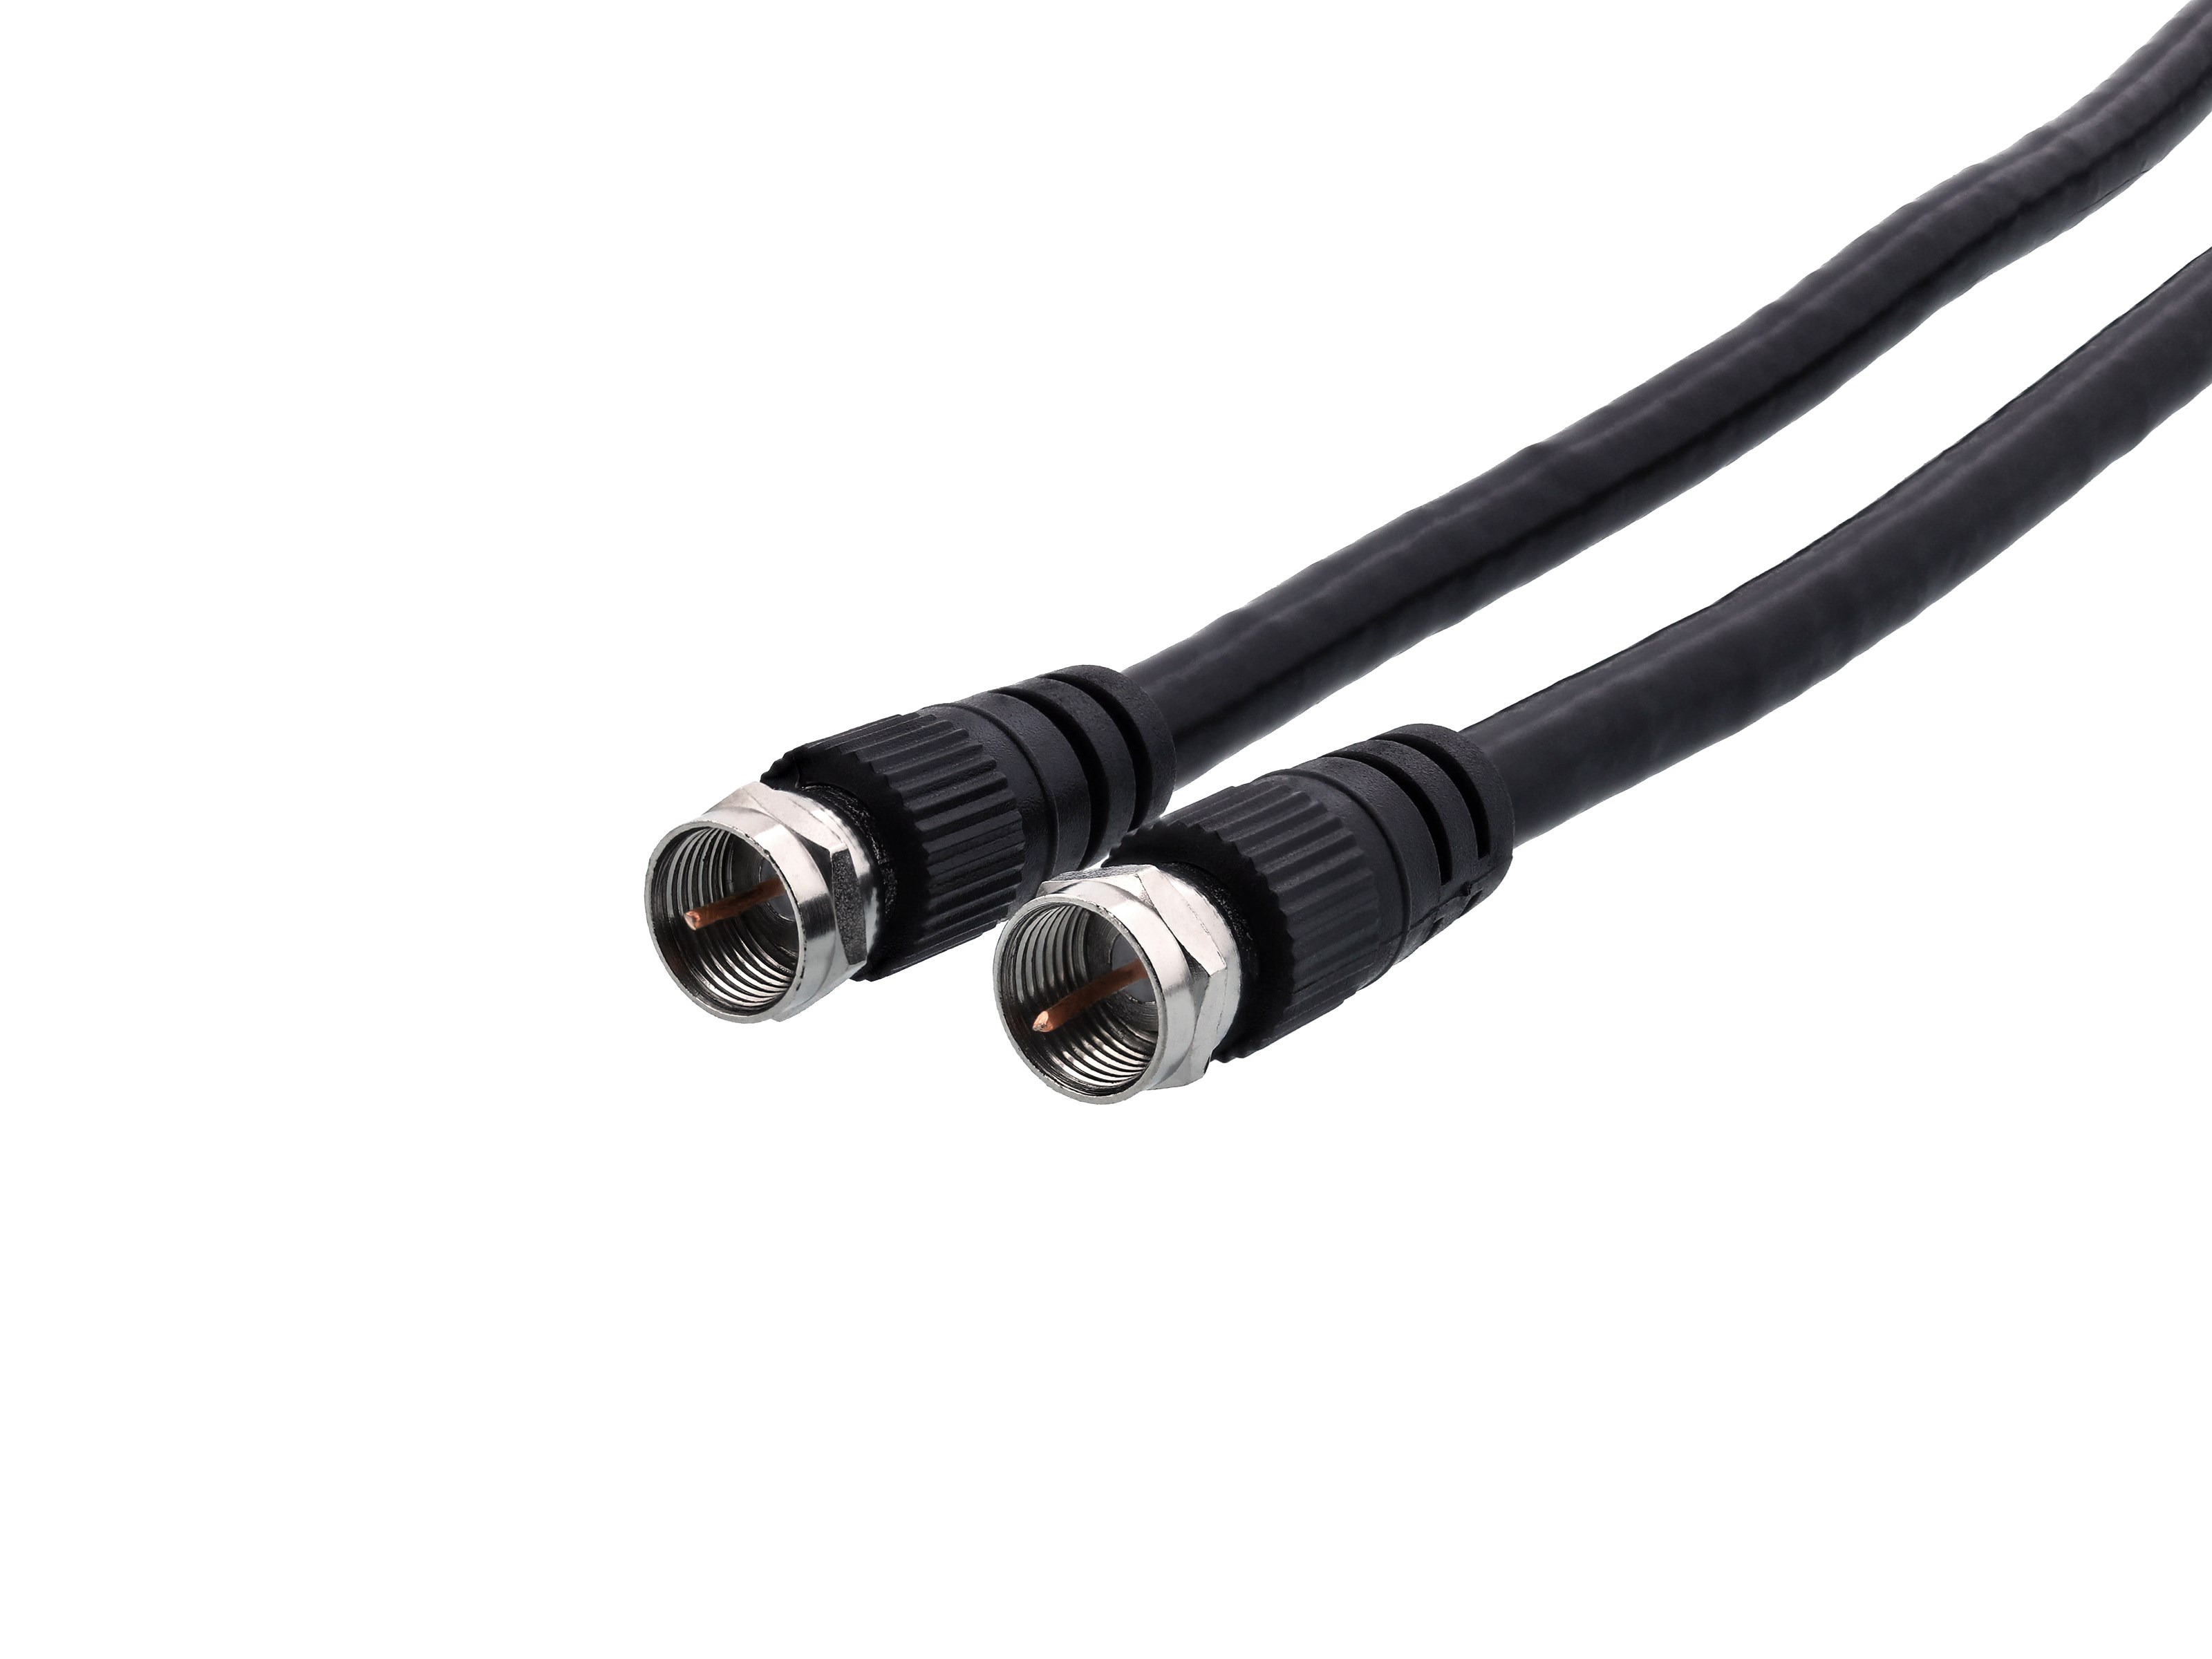 1ft Black COAXIAL Cable TV RG6 CATV F-Type F-PIN Cord Video 75 OHM 18AWG VCR